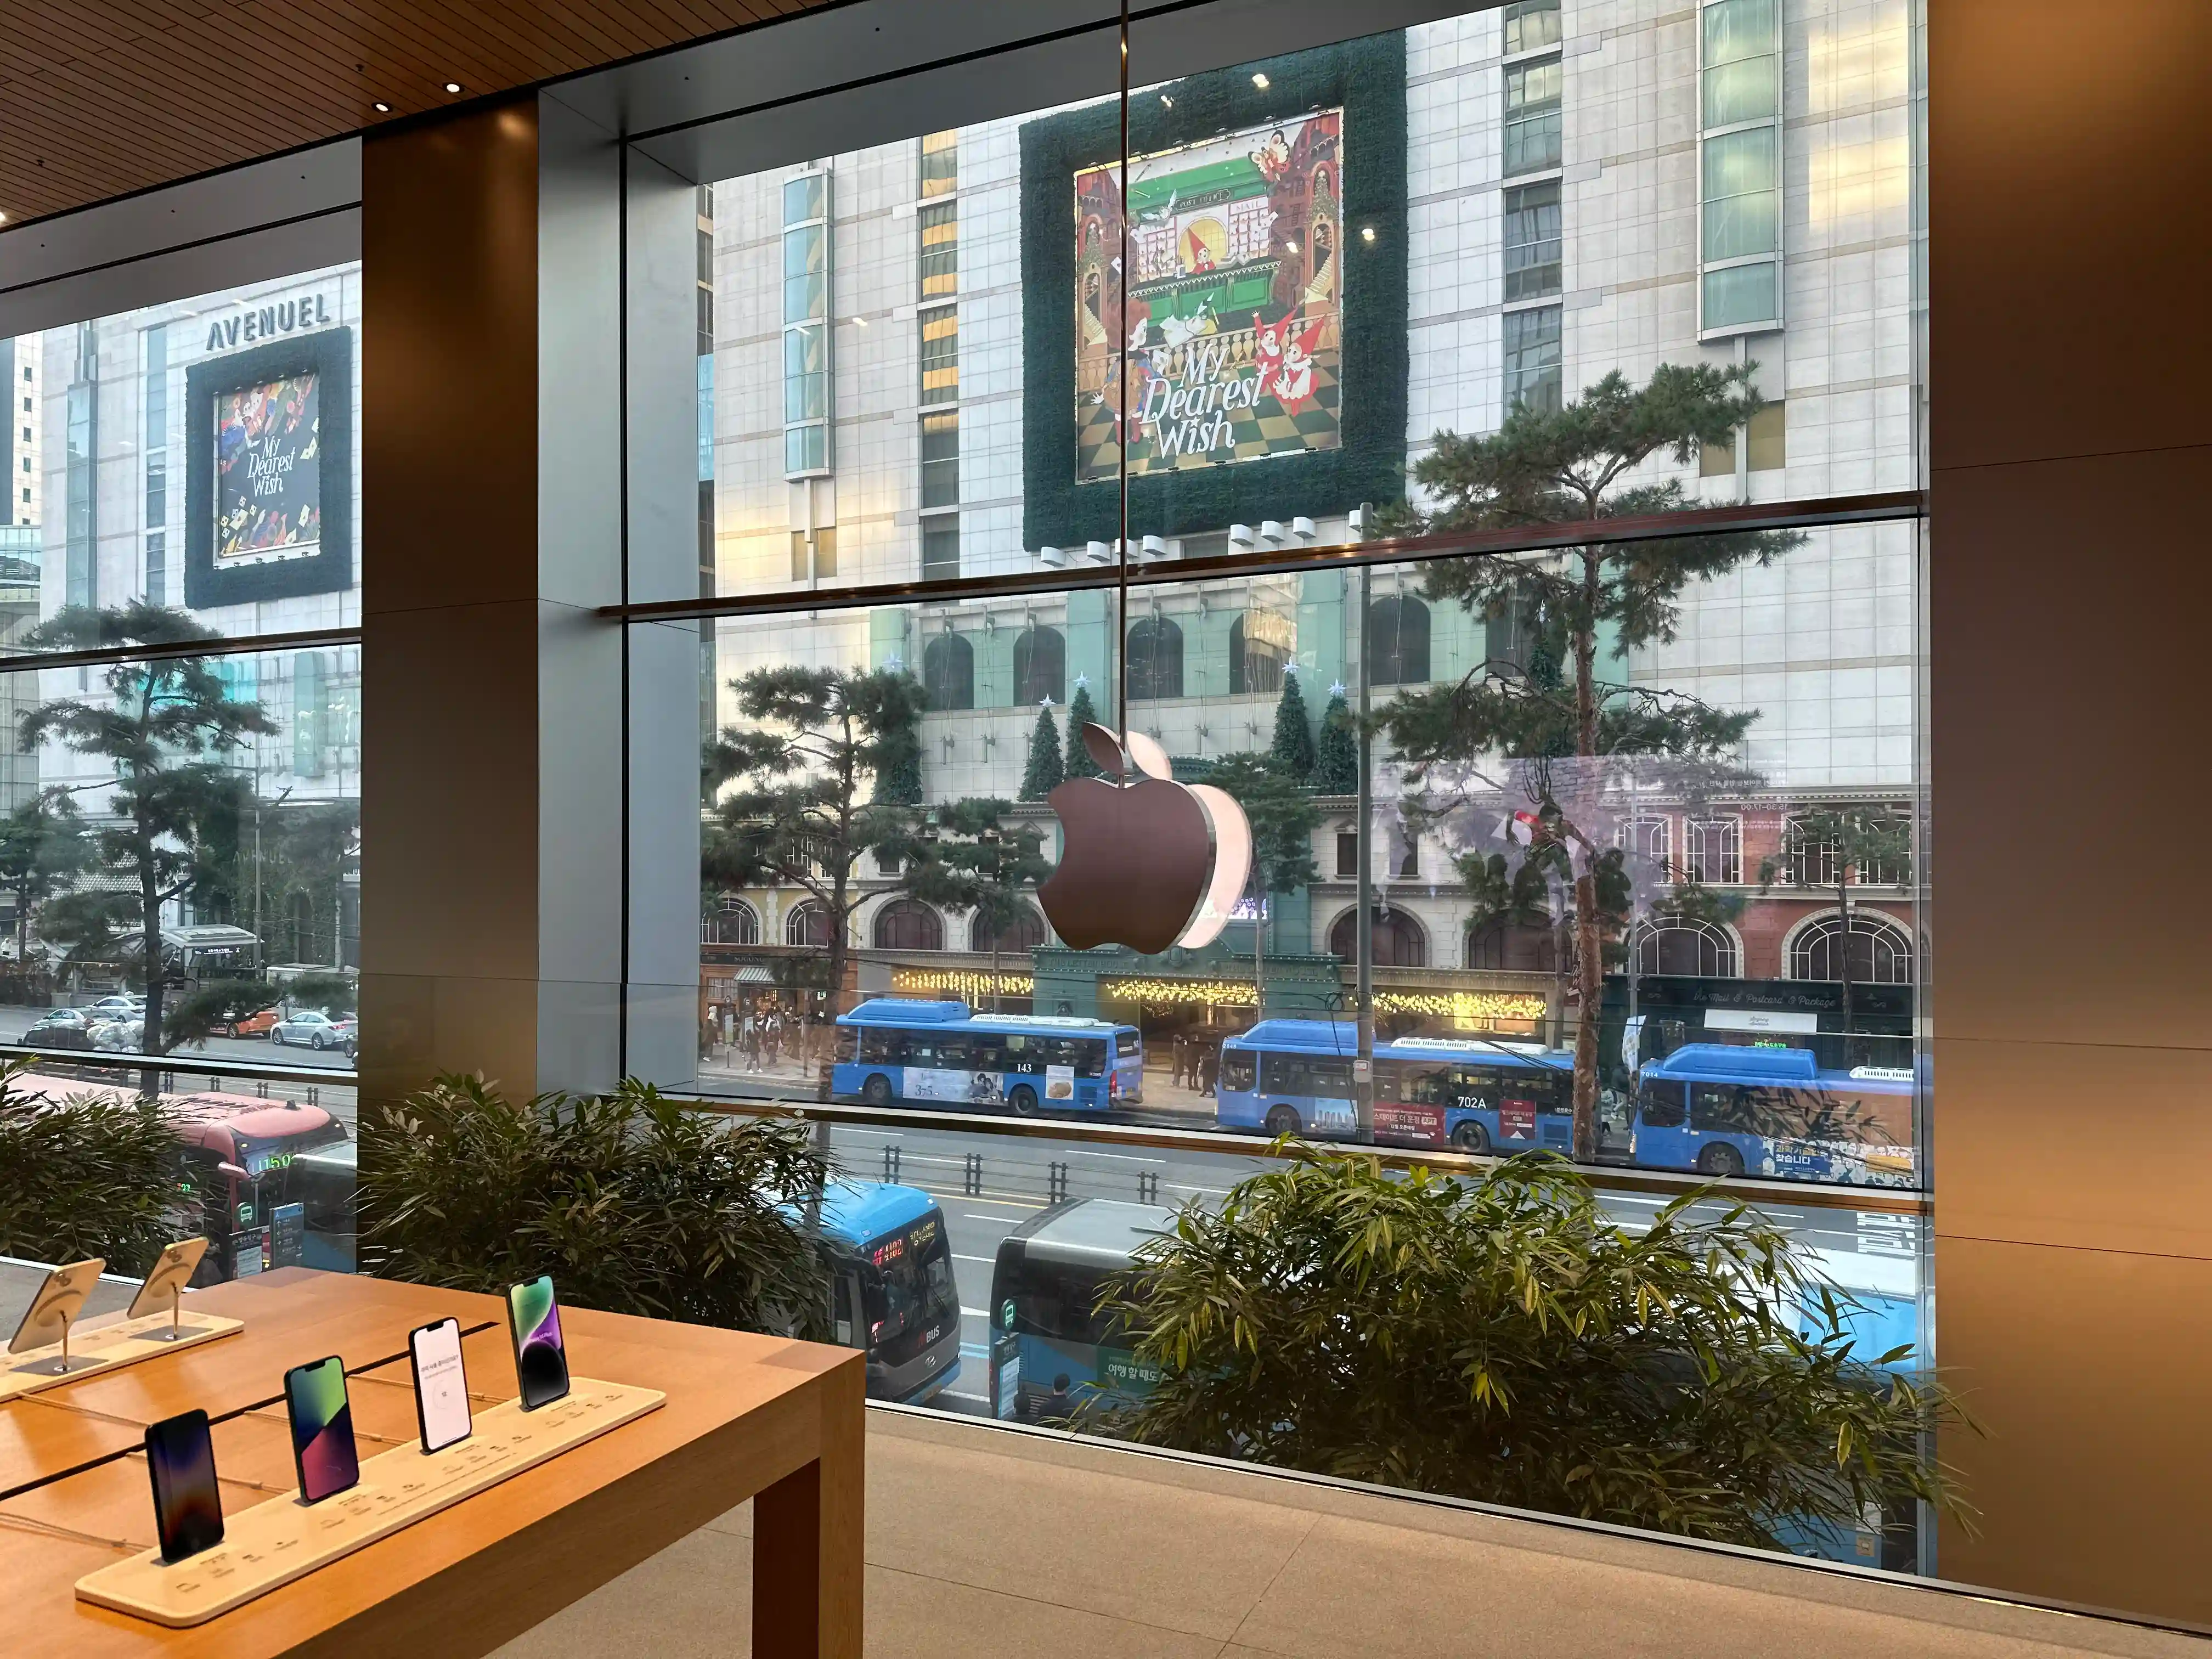 the iconic Apple logo in apple myeondong